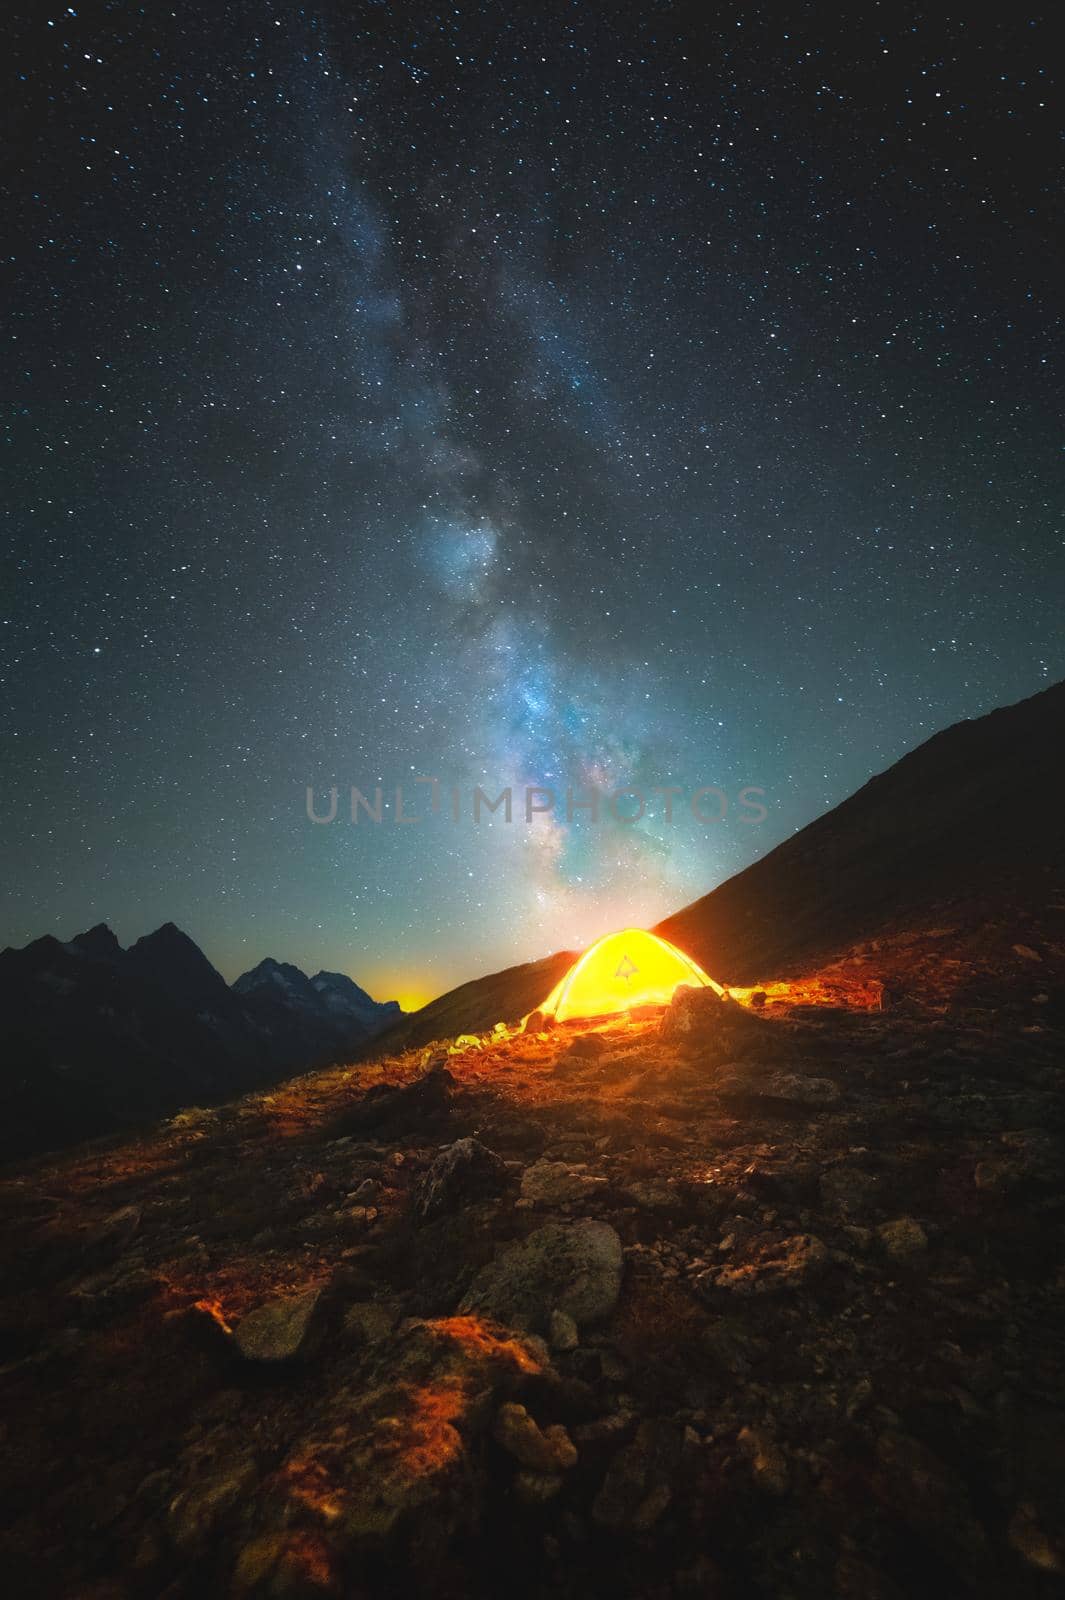 A vertical photo of the starry sky high in the mountains. The saturated milky way points to a luminous tent high in the mountains against the backdrop of a mountainous horizon. Astrophotography by yanik88